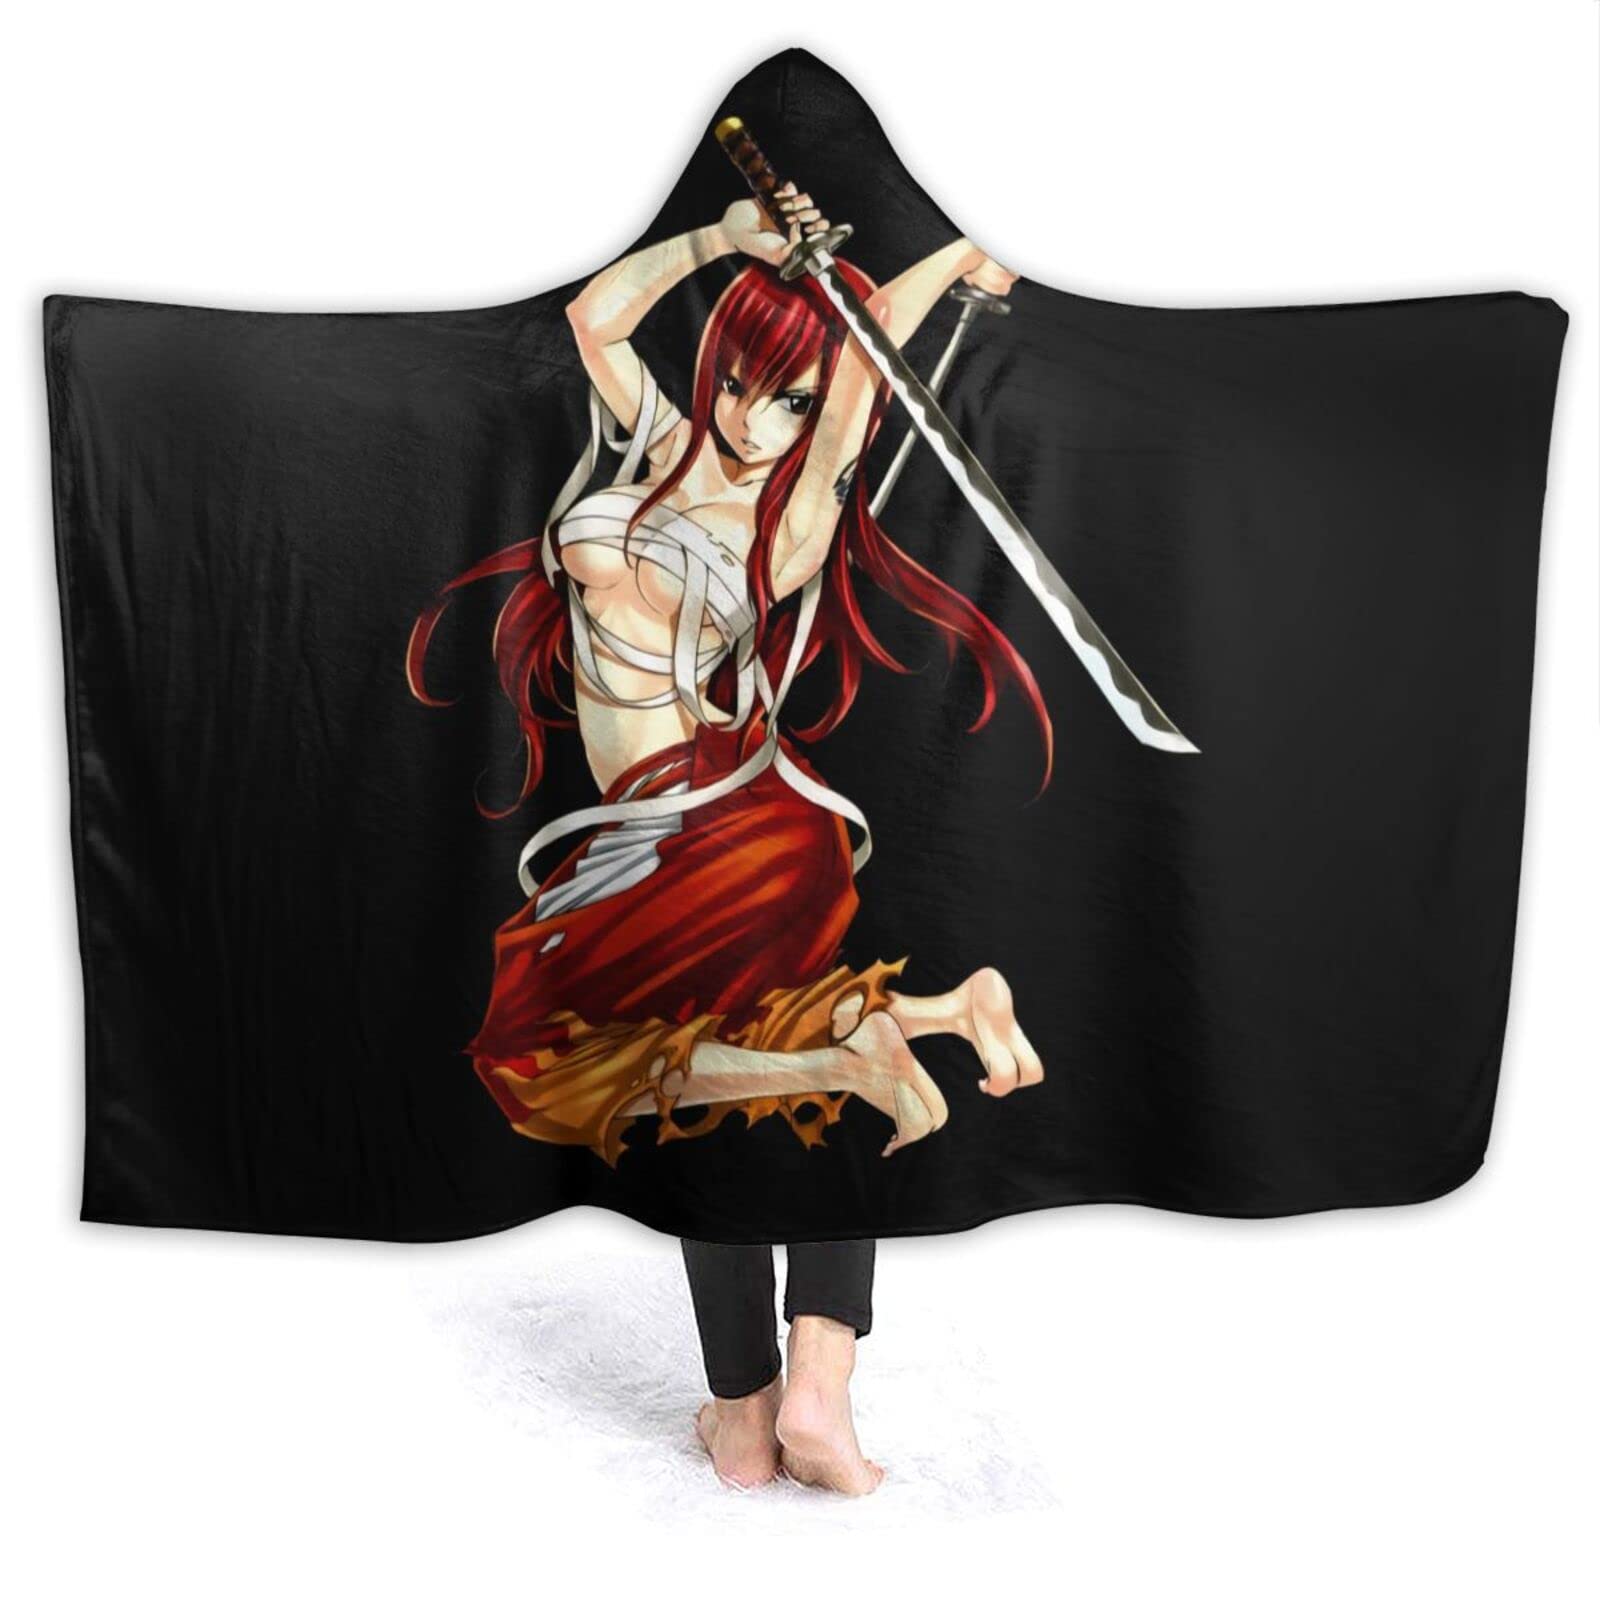 tiusgo Erza Scarlet Hooded Blanket Lightweight Cozy Cute Ultra Soft Plush Flannel Throw Blankets for Couch Sofa Bed Chair 60"X50"